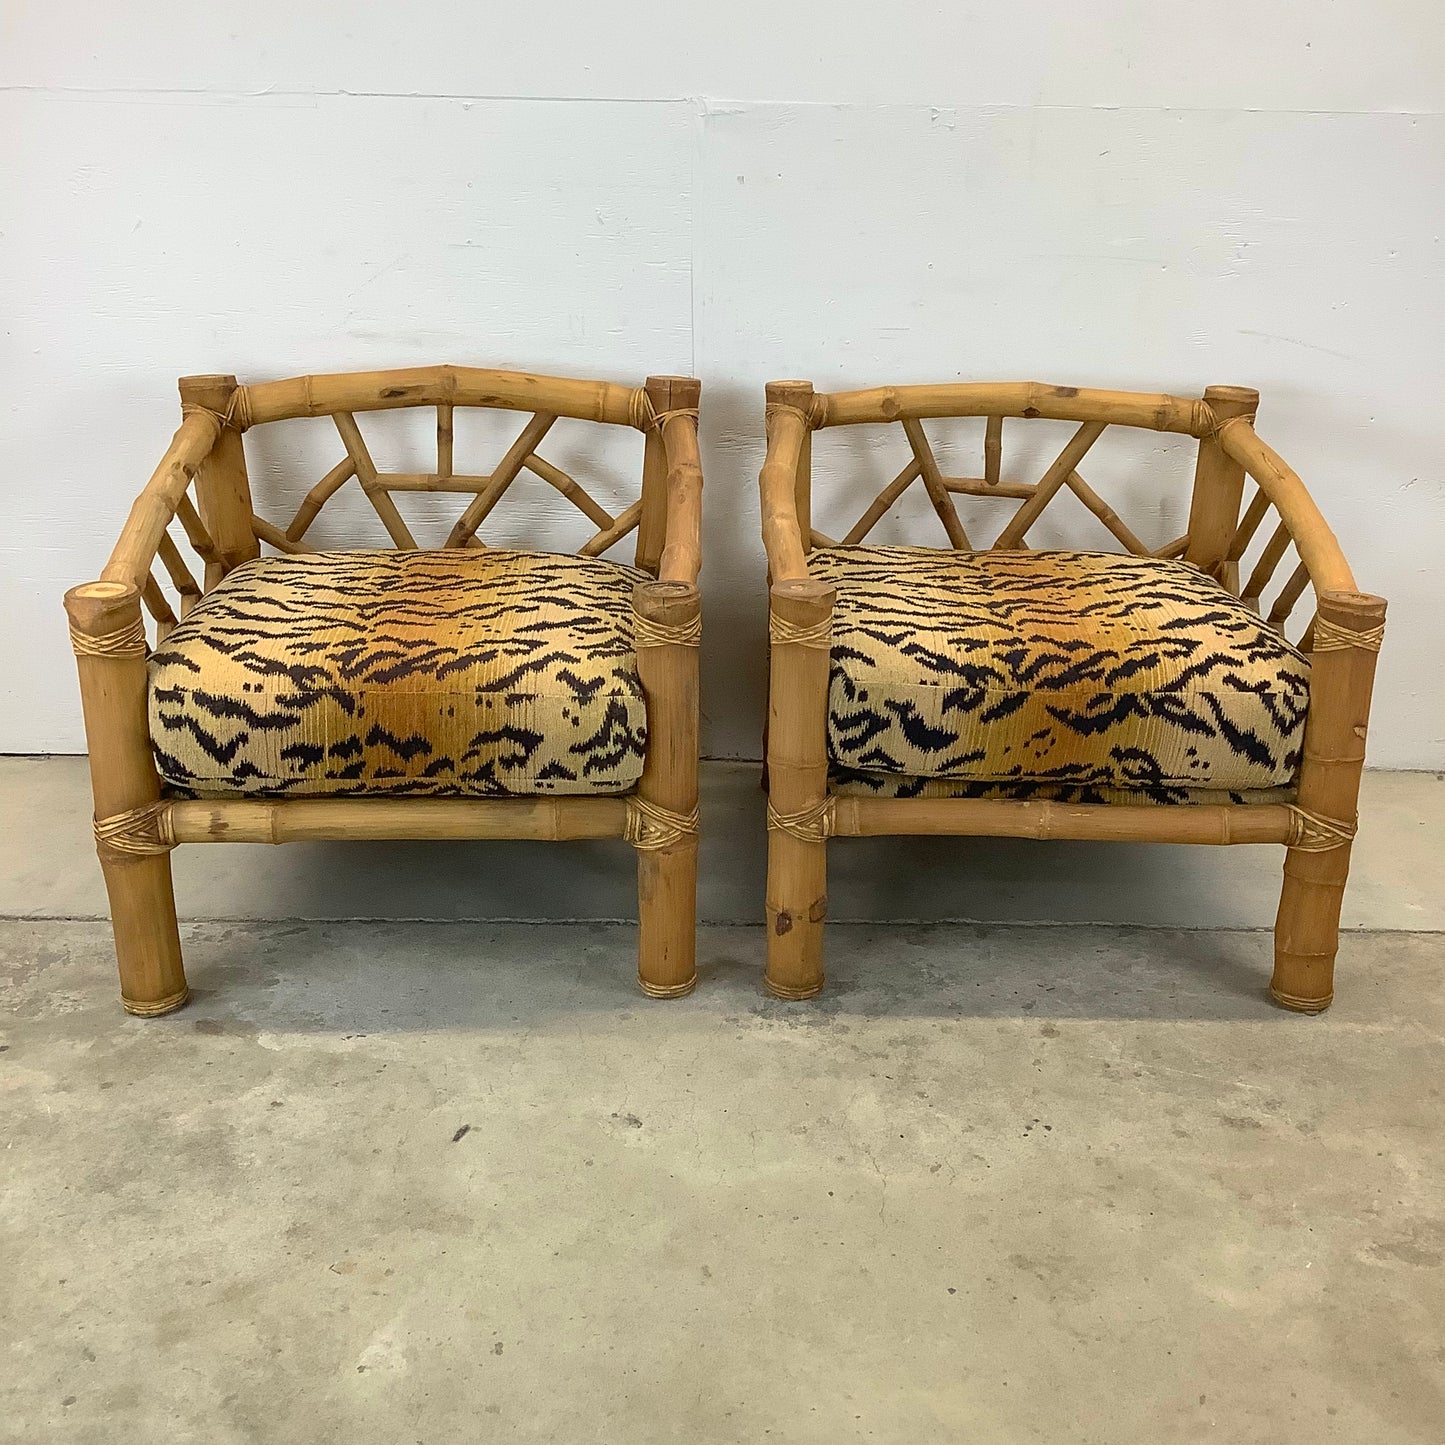 Vintage Bamboo Armchairs & Ottoman in Tiger Print